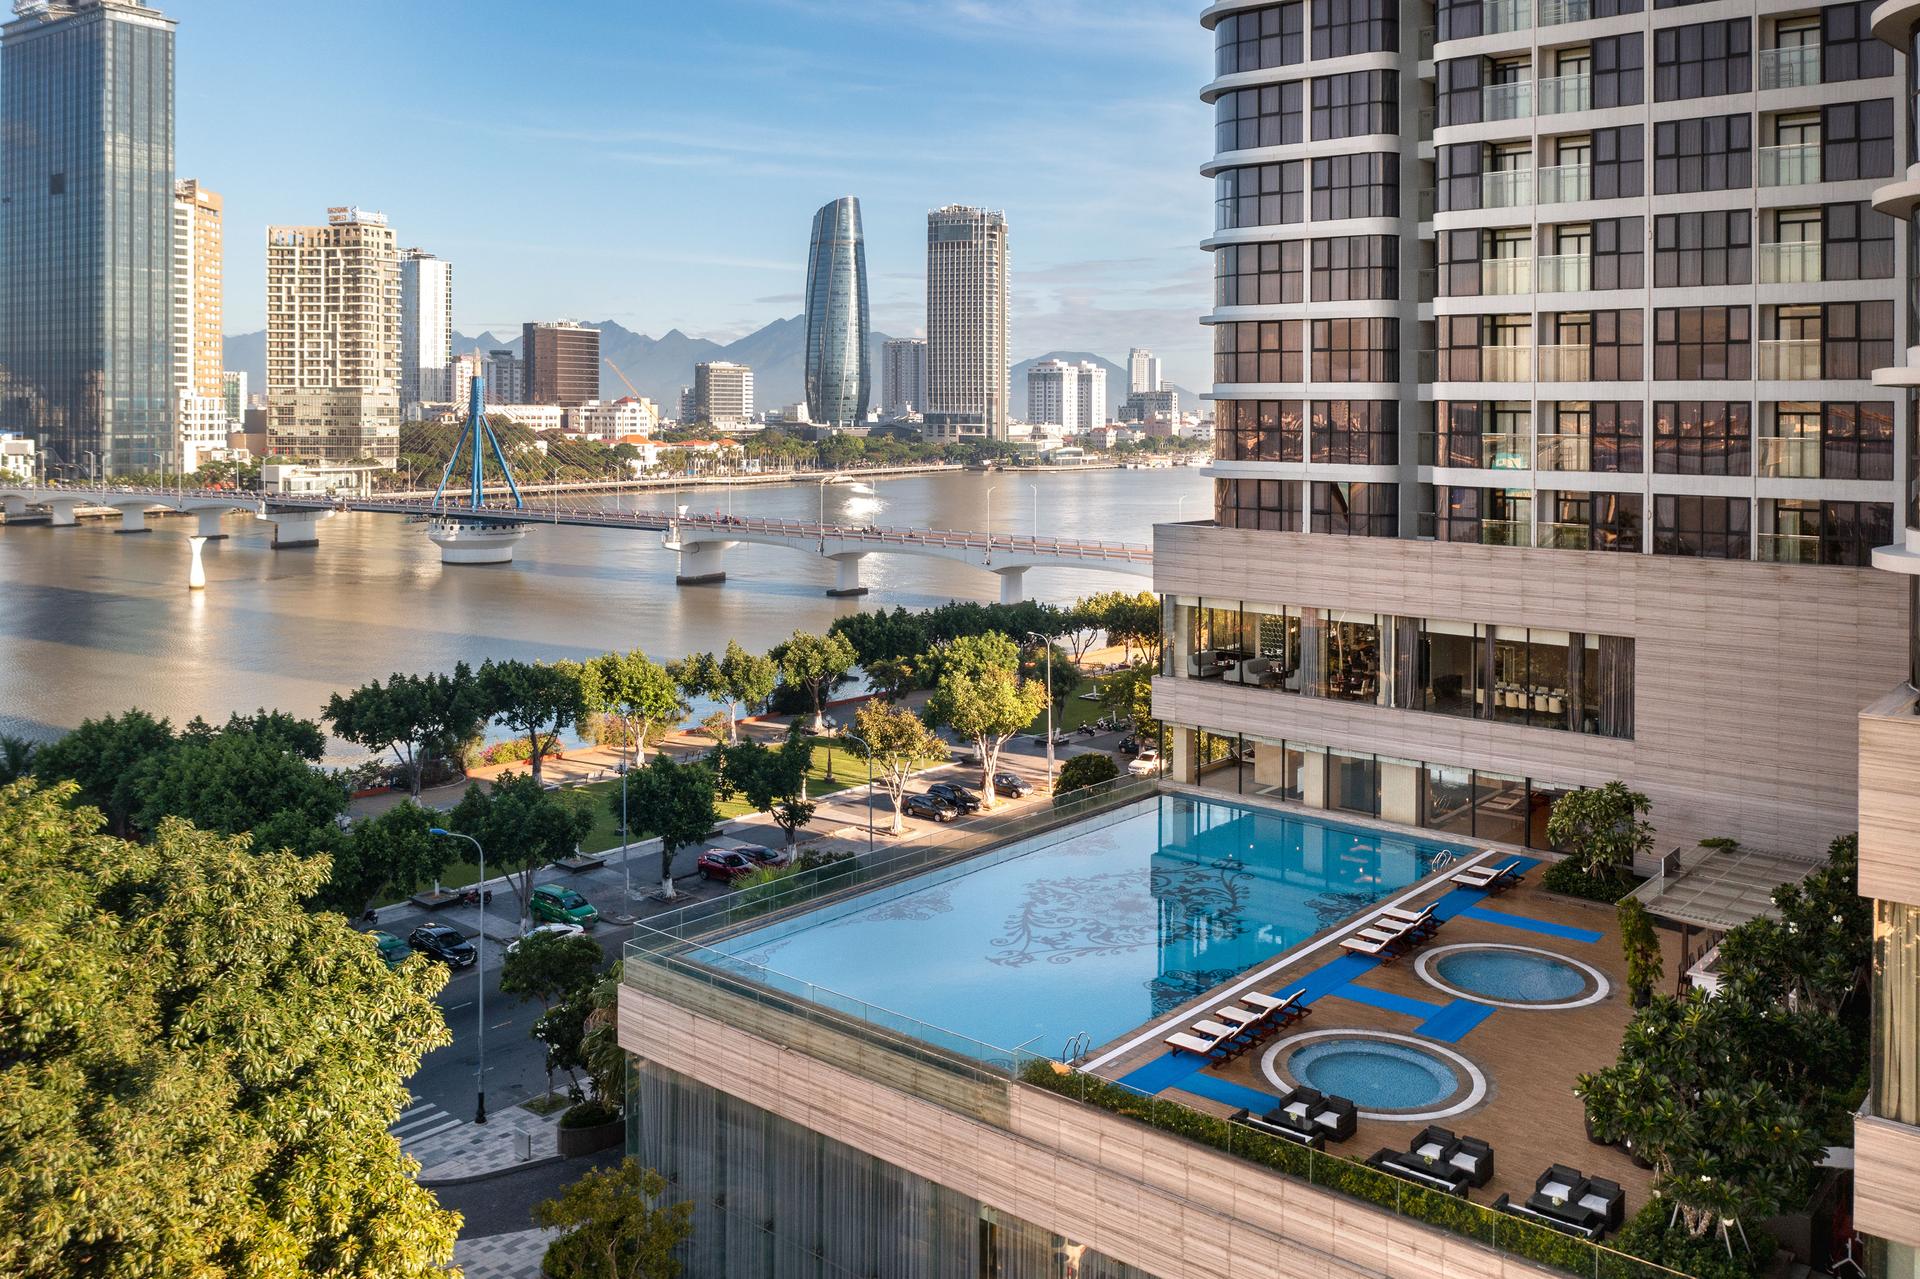 Meliá Vinpearl Danang Riverfront stands out thanks to the impressive view of the whole city.